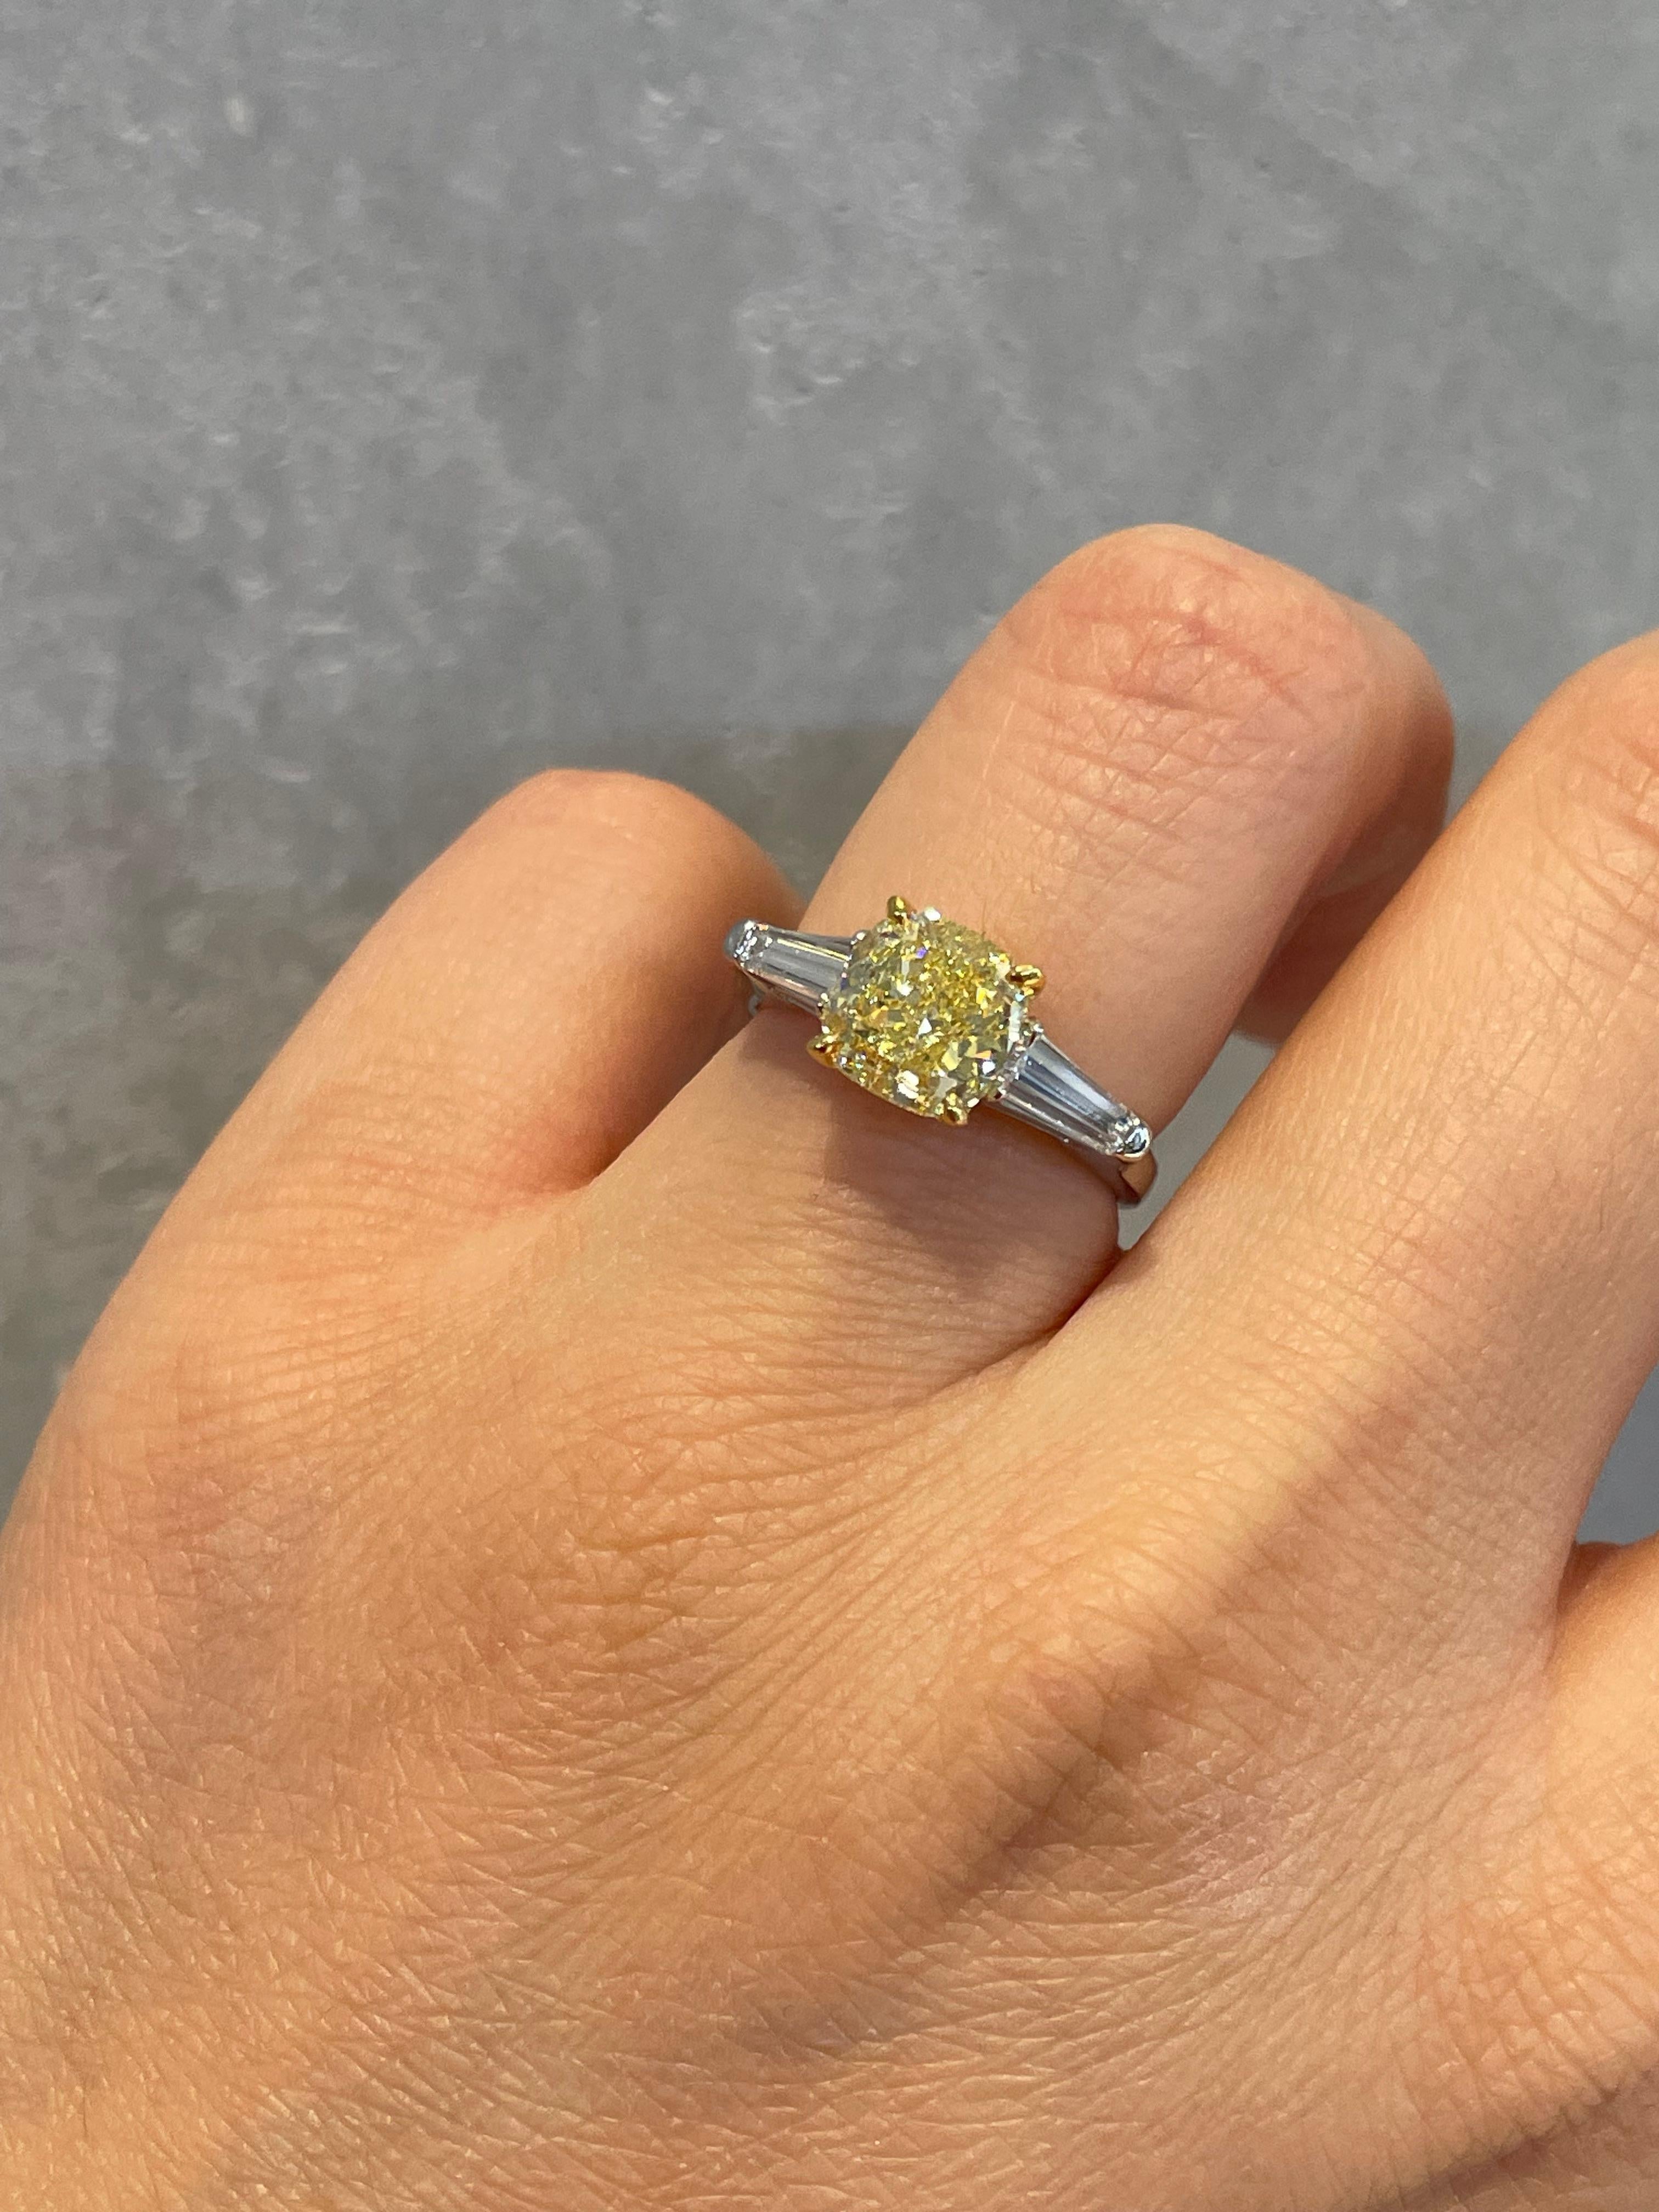 For Sale:  2.04ct Fancy Yellow Diamond with 0.50ct Baguette cut White Diamonds Ring 8